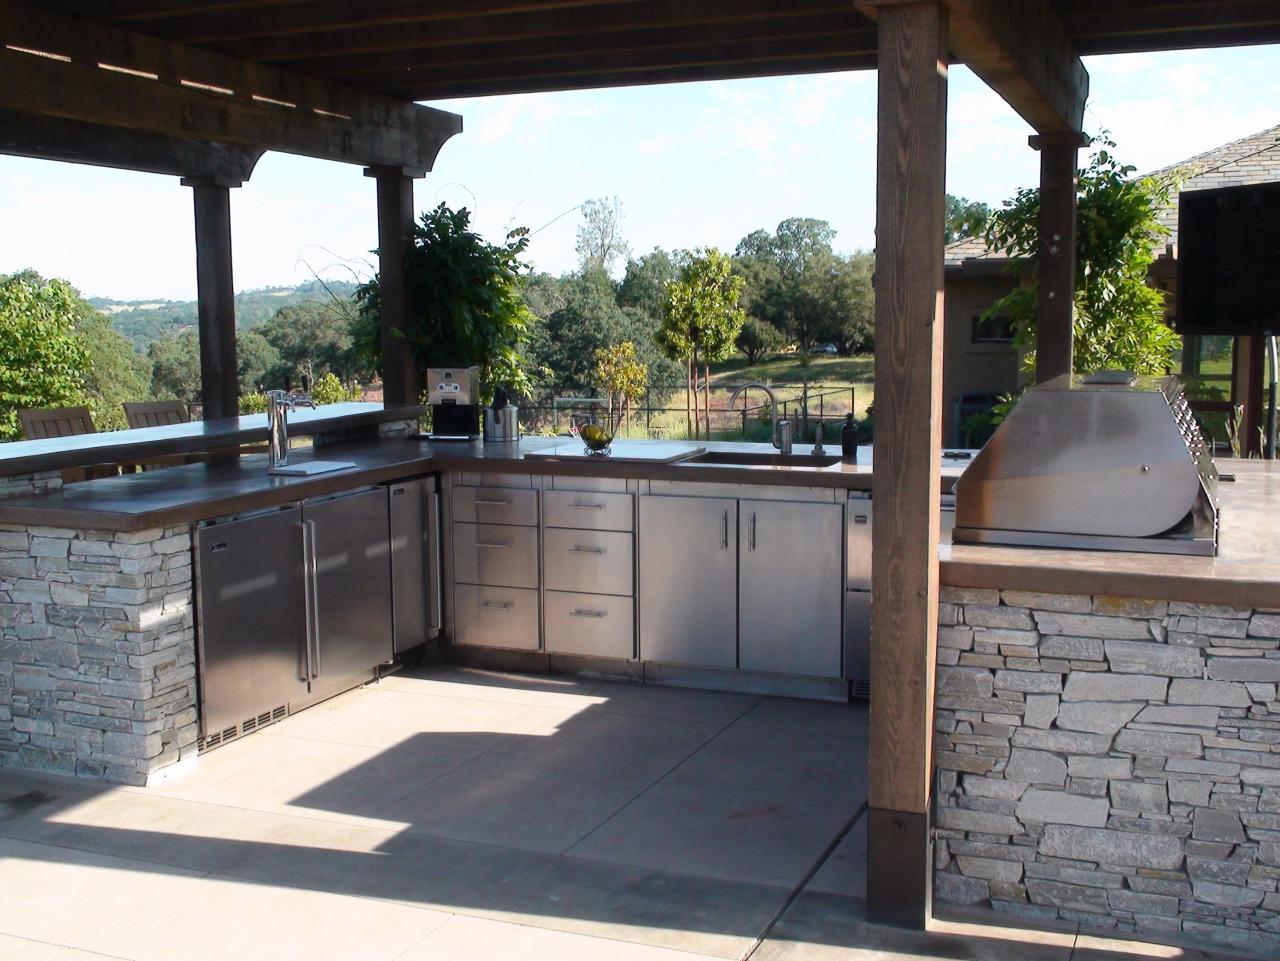 Optimizing An Outdoor Kitchen Layout, L Shaped Outdoor Kitchen With Bar Plans